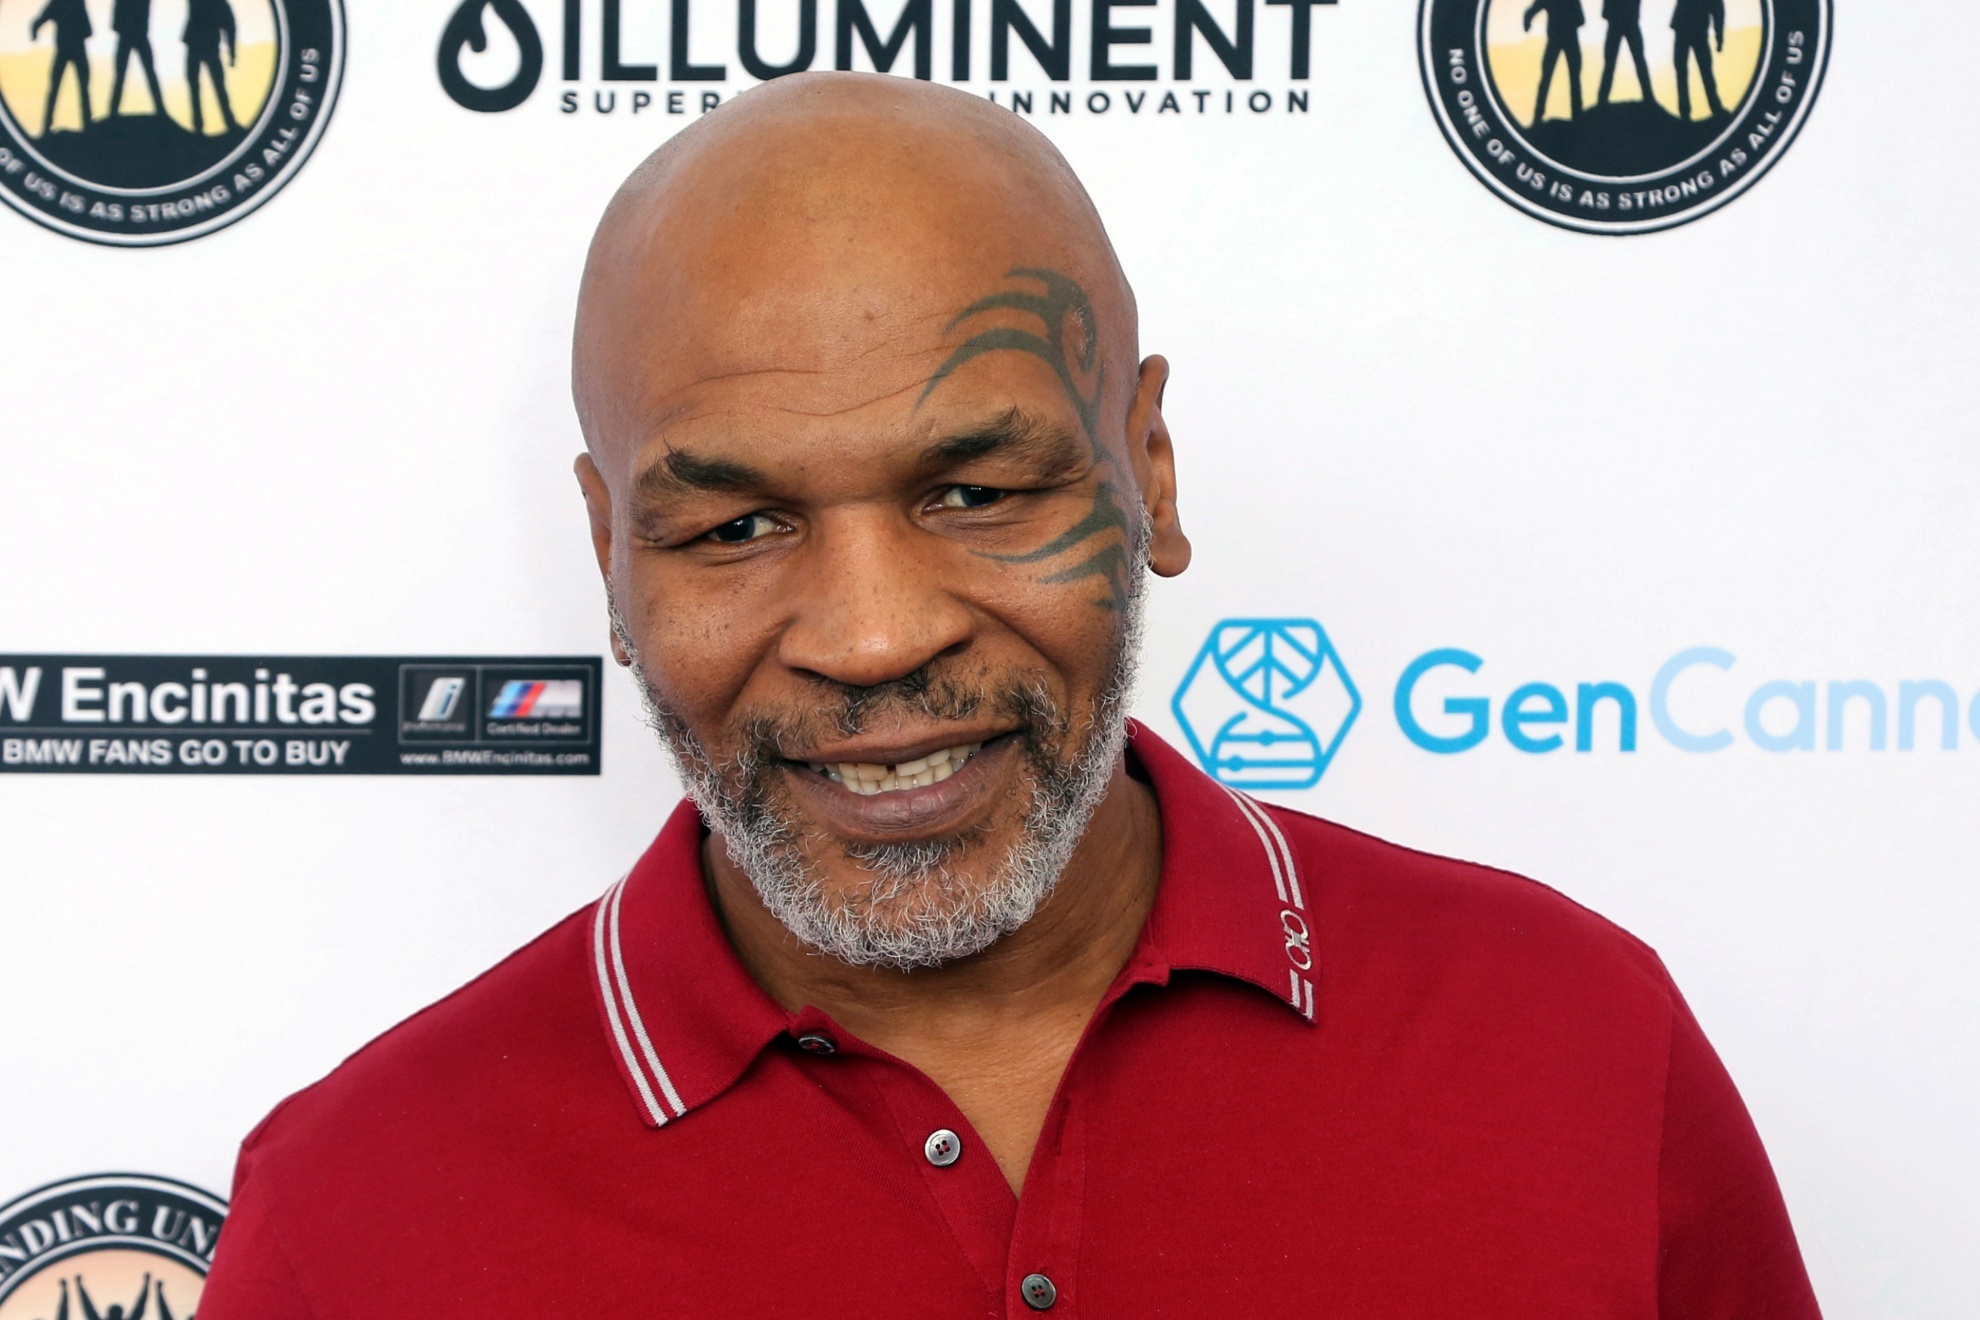 Mike Tyson described cannabis as "the best thing" that's ever happened to him